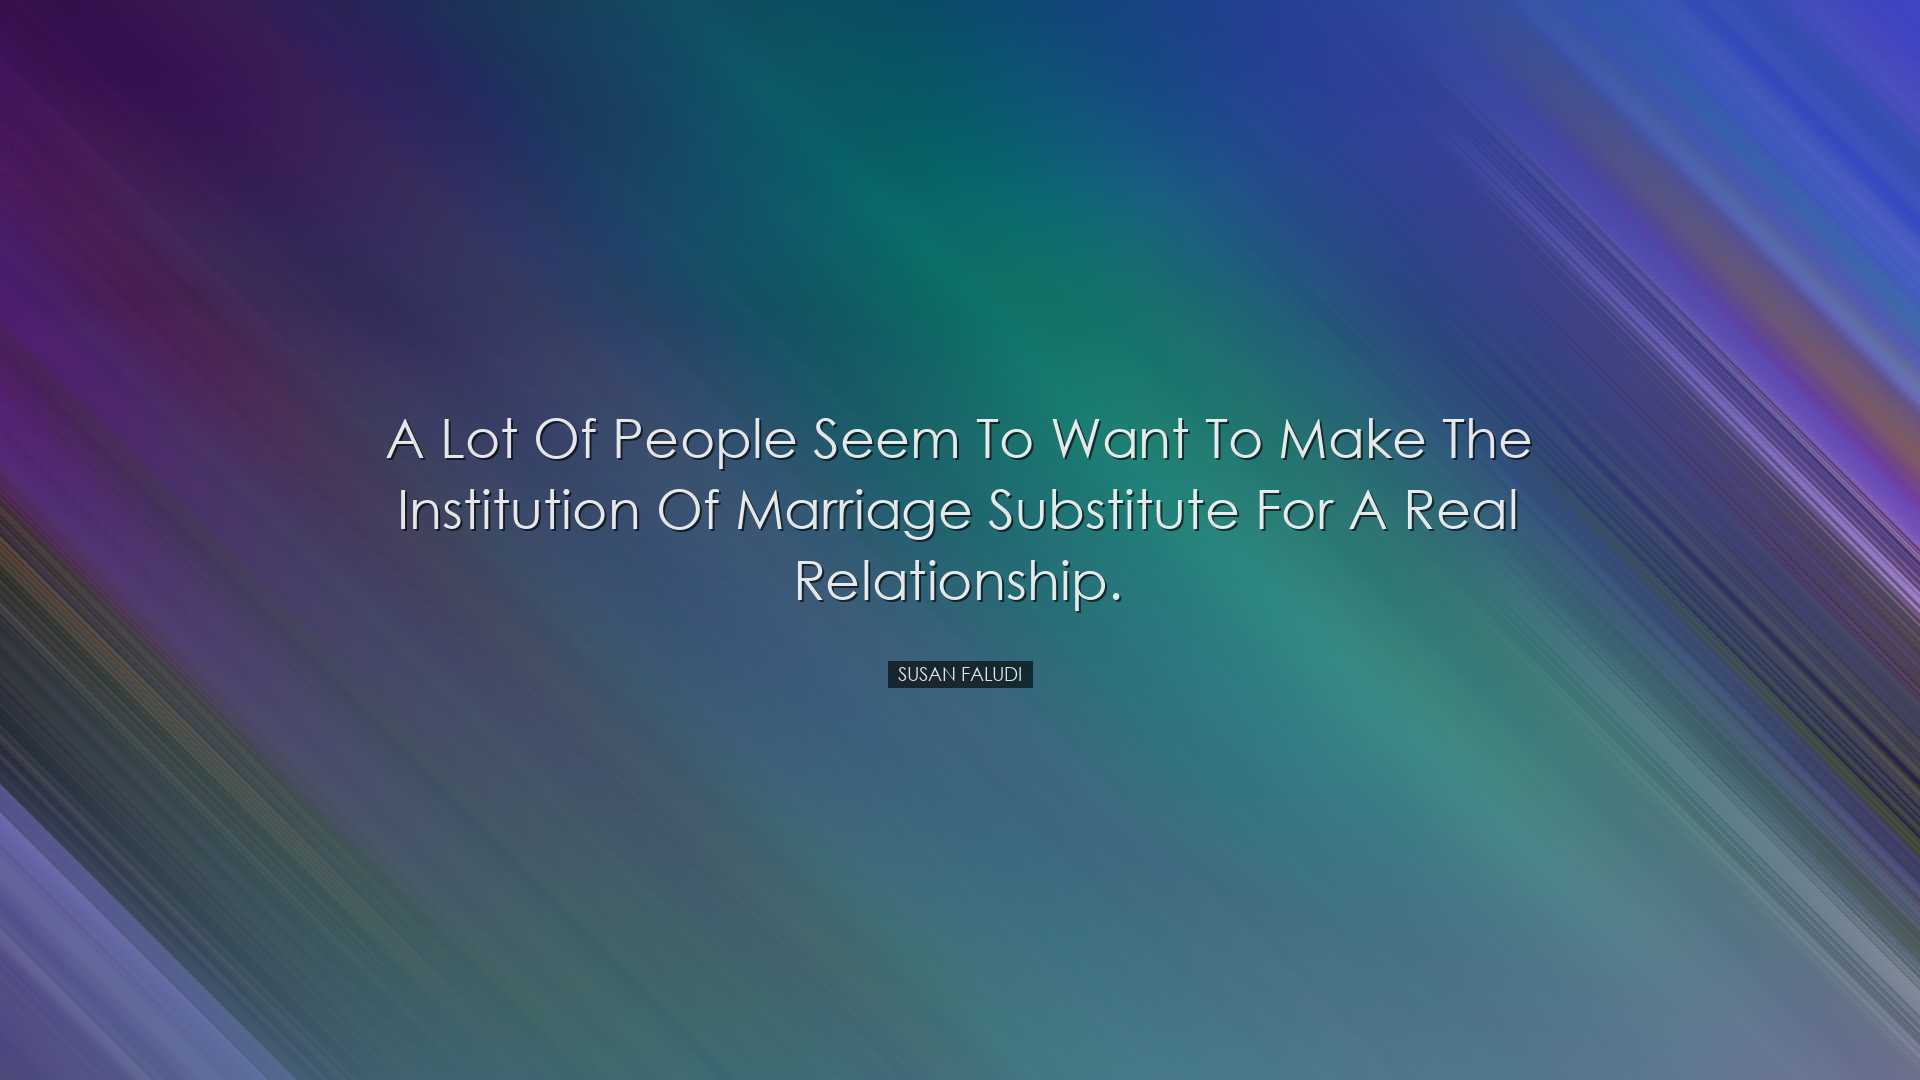 A lot of people seem to want to make the institution of marriage s